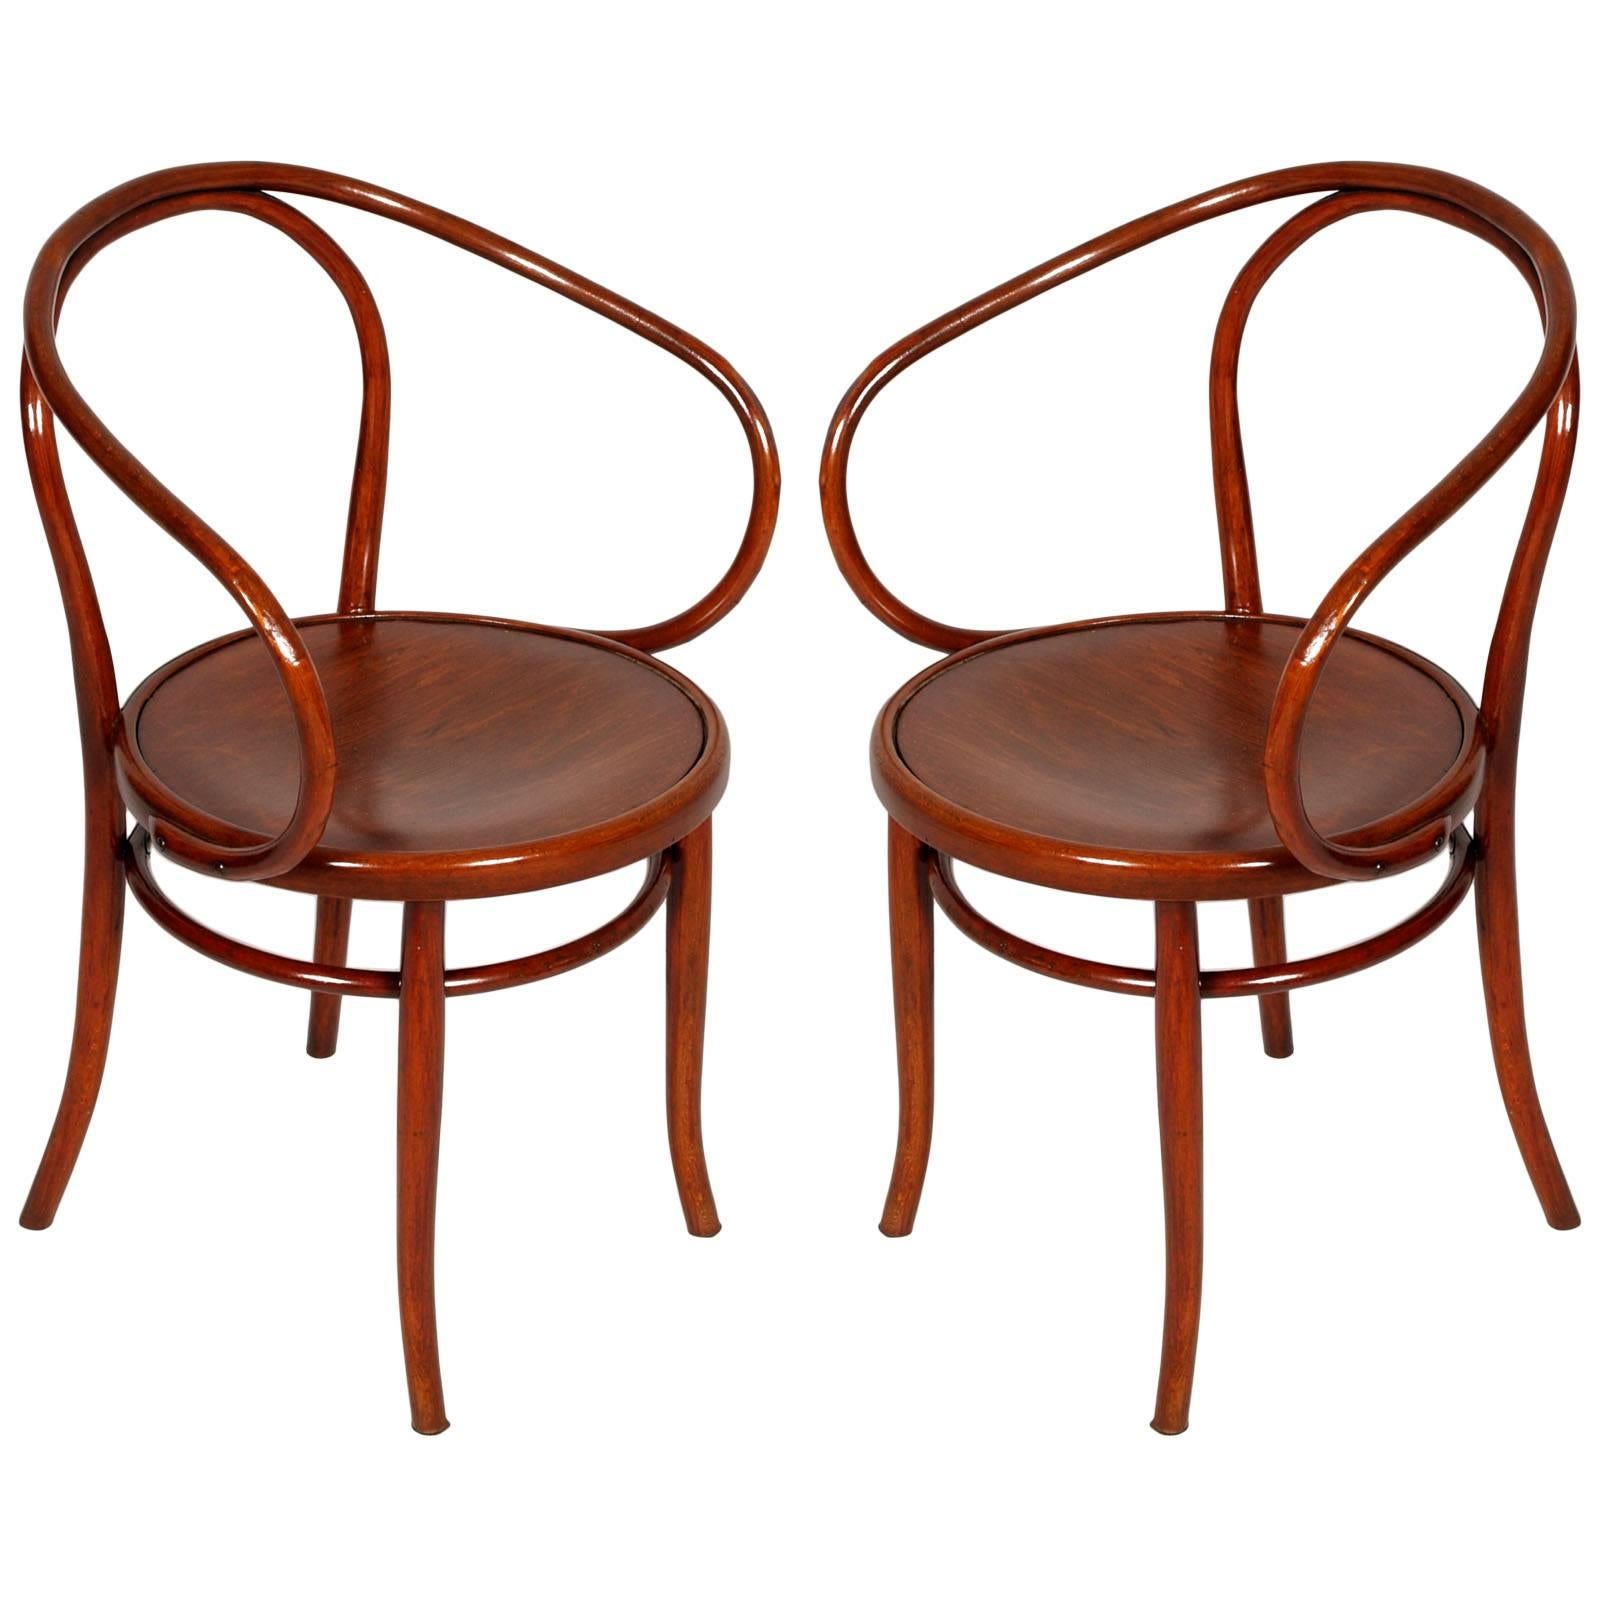 Late 19th Century Pair of Bentwood B-9 Armchairs by Jacob and Josef Kohn For Sale